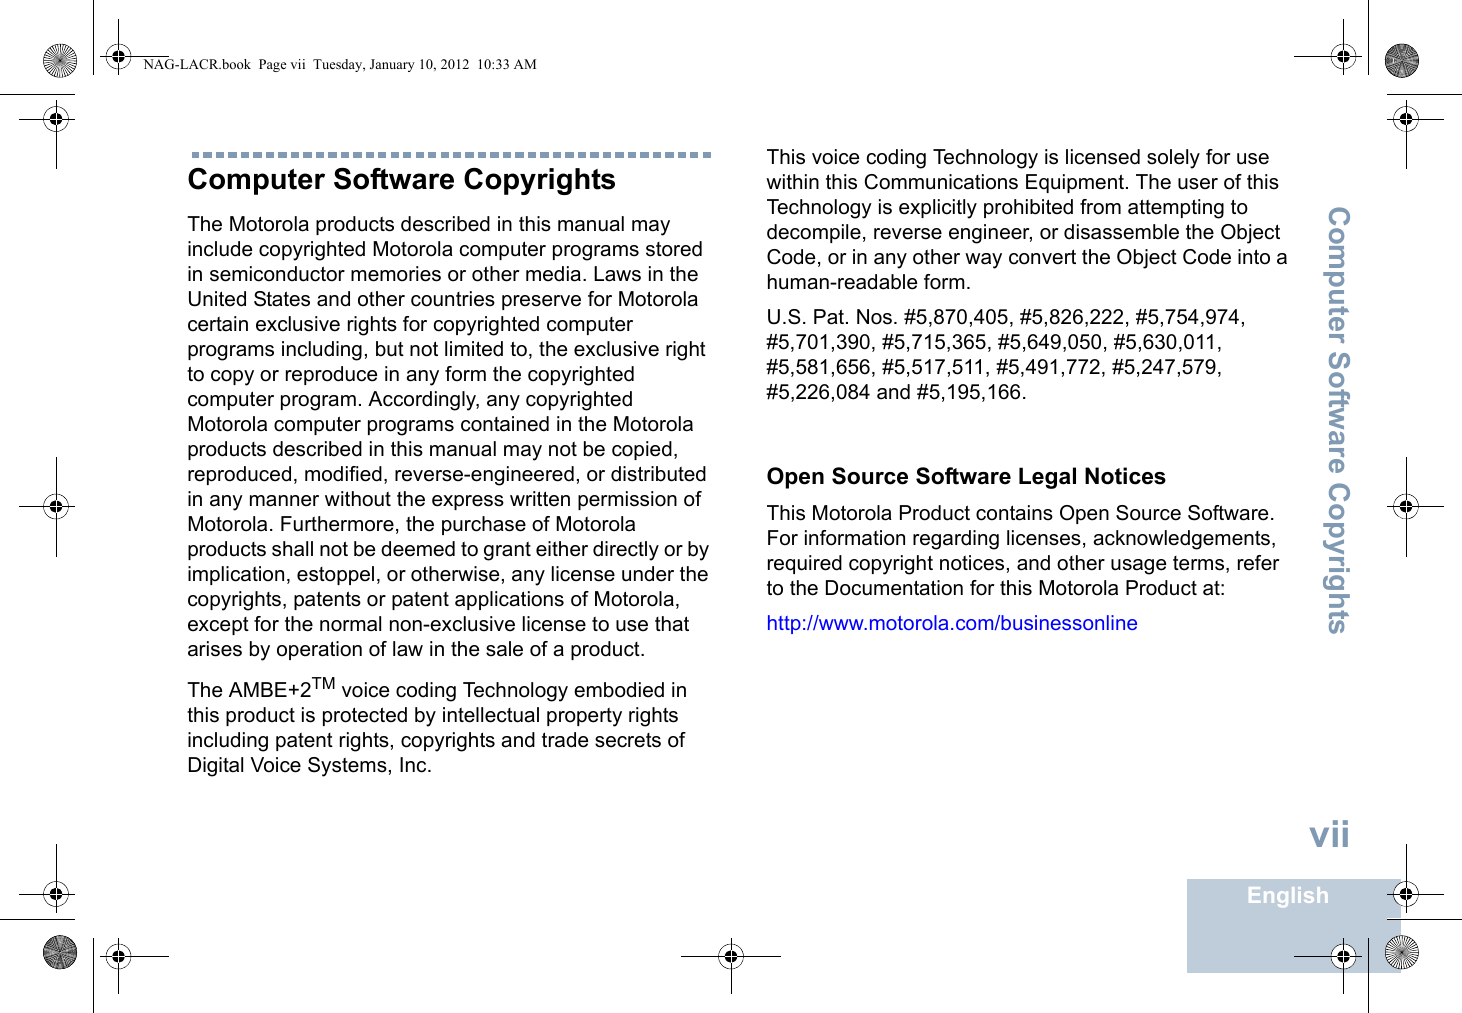 Computer Software CopyrightsEnglishviiComputer Software CopyrightsThe Motorola products described in this manual may include copyrighted Motorola computer programs stored in semiconductor memories or other media. Laws in the United States and other countries preserve for Motorola certain exclusive rights for copyrighted computer programs including, but not limited to, the exclusive right to copy or reproduce in any form the copyrighted computer program. Accordingly, any copyrighted Motorola computer programs contained in the Motorola products described in this manual may not be copied, reproduced, modified, reverse-engineered, or distributed in any manner without the express written permission of Motorola. Furthermore, the purchase of Motorola products shall not be deemed to grant either directly or by implication, estoppel, or otherwise, any license under the copyrights, patents or patent applications of Motorola, except for the normal non-exclusive license to use that arises by operation of law in the sale of a product.The AMBE+2TM voice coding Technology embodied in this product is protected by intellectual property rights including patent rights, copyrights and trade secrets of Digital Voice Systems, Inc. This voice coding Technology is licensed solely for use within this Communications Equipment. The user of this Technology is explicitly prohibited from attempting to decompile, reverse engineer, or disassemble the Object Code, or in any other way convert the Object Code into a human-readable form. U.S. Pat. Nos. #5,870,405, #5,826,222, #5,754,974, #5,701,390, #5,715,365, #5,649,050, #5,630,011, #5,581,656, #5,517,511, #5,491,772, #5,247,579, #5,226,084 and #5,195,166.Open Source Software Legal NoticesThis Motorola Product contains Open Source Software. For information regarding licenses, acknowledgements, required copyright notices, and other usage terms, refer to the Documentation for this Motorola Product at: http://www.motorola.com/businessonlineNAG-LACR.book  Page vii  Tuesday, January 10, 2012  10:33 AM